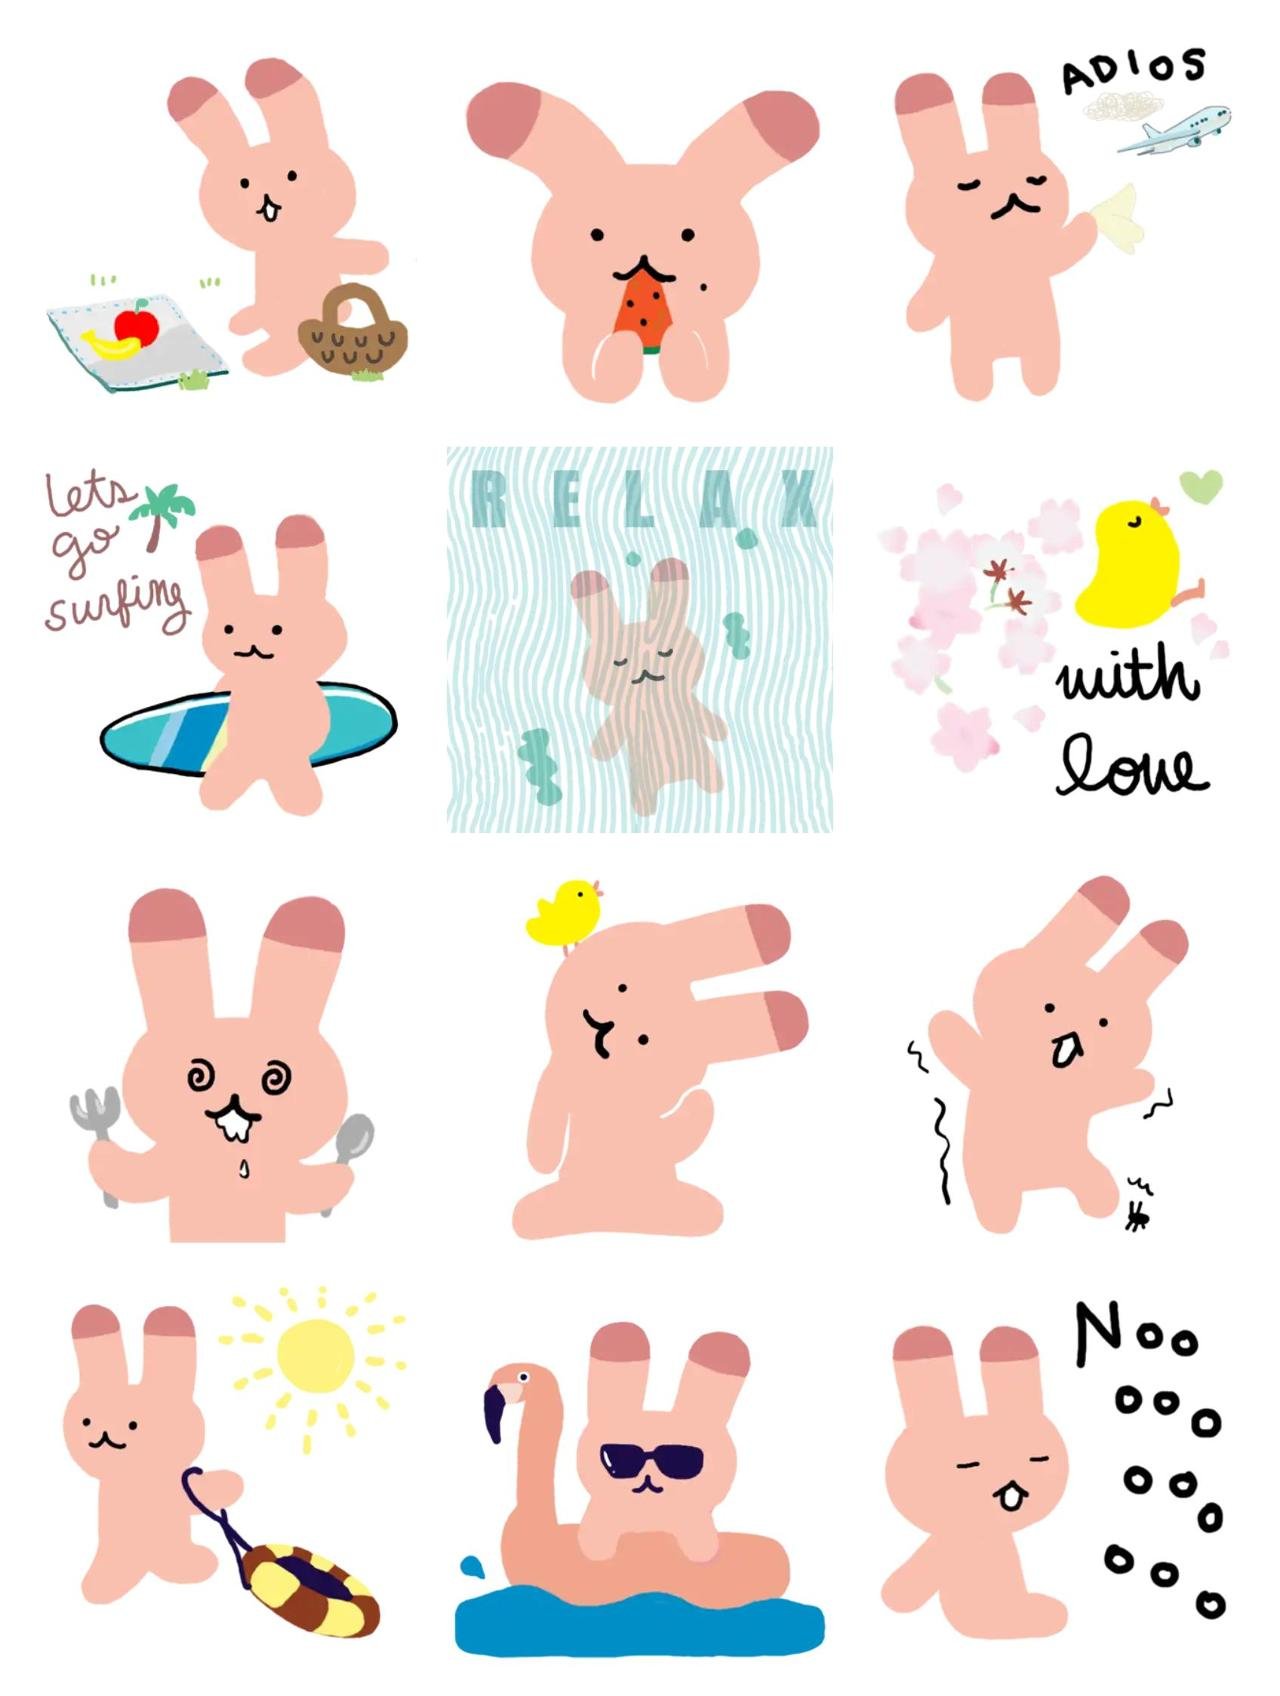 Summer with Rabbit Soo Animation/Cartoon,Animals sticker pack for Whatsapp, Telegram, Signal, and others chatting and message apps